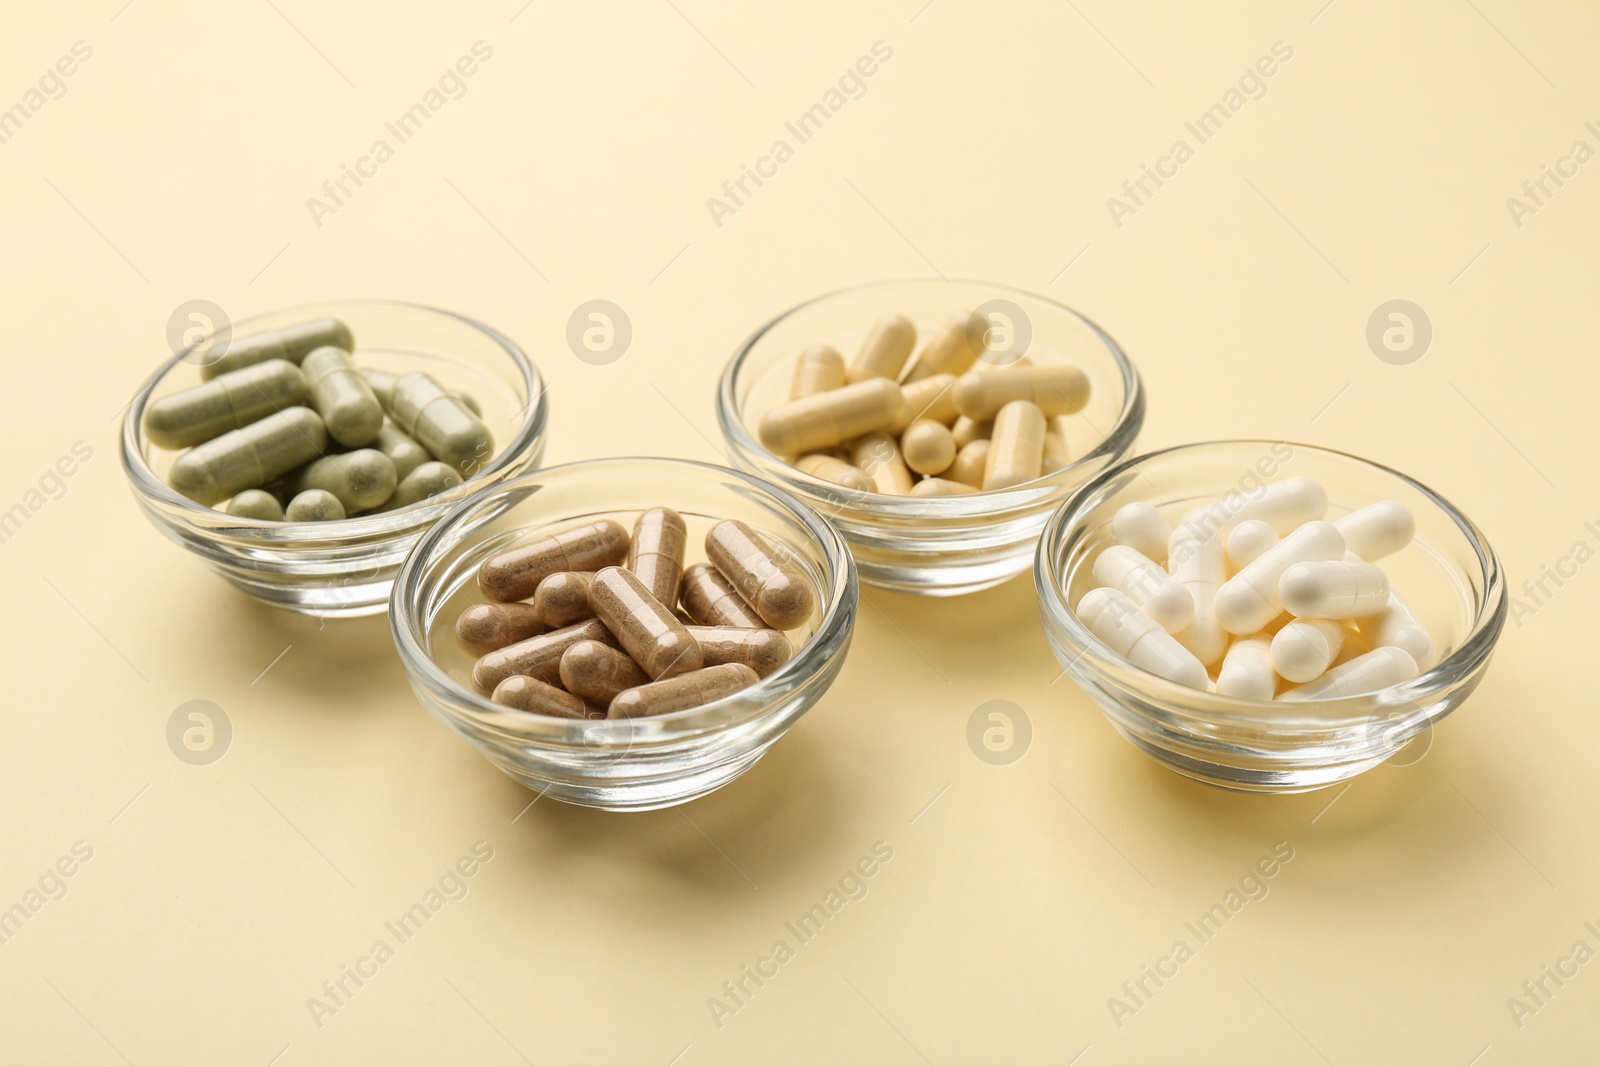 Photo of Different vitamin capsules in bowls on pale yellow background